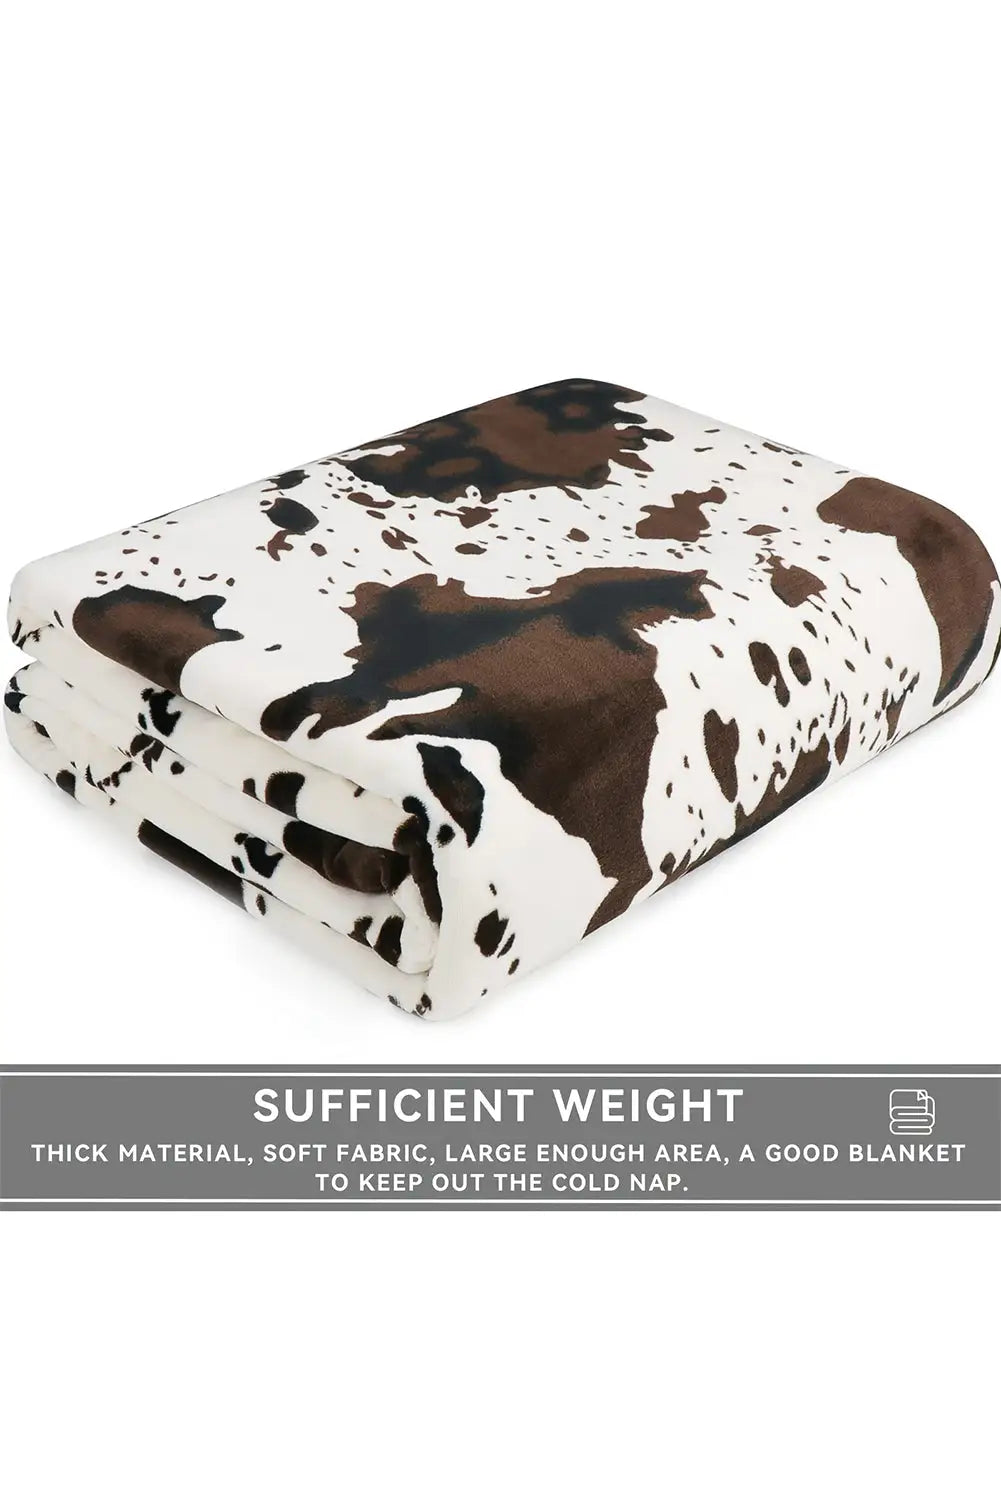 Multicolour cow spots plush blanket 150*200cm - one size / 100% polyester - blankets